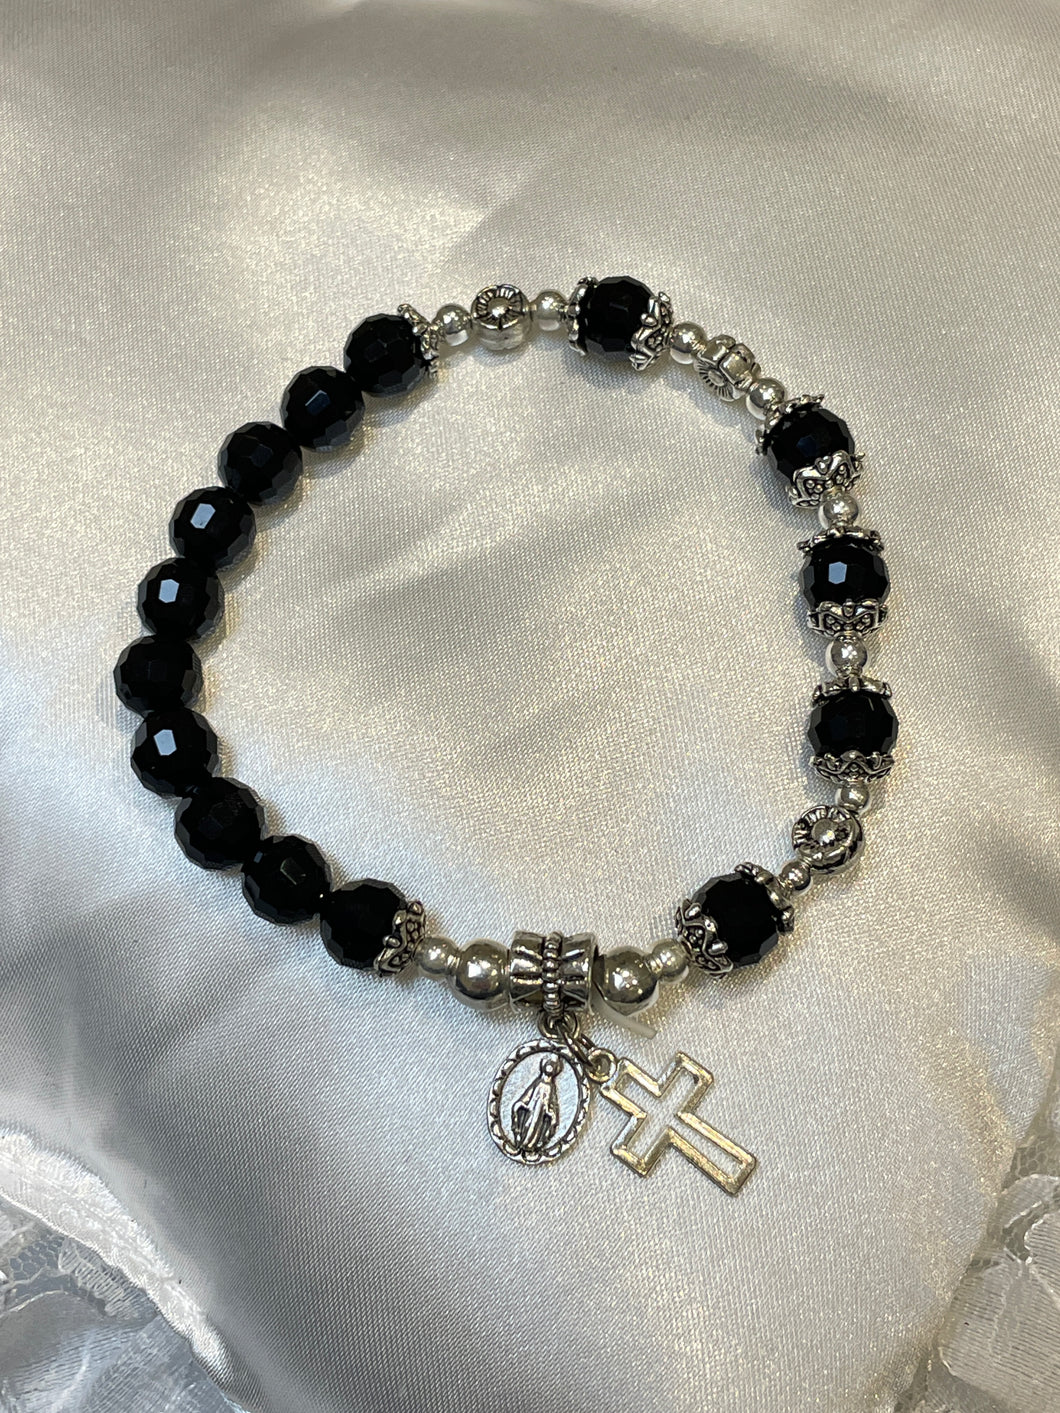 Black Gemstone Rosary Bracelet with Miraculous Medal and Cross Charms